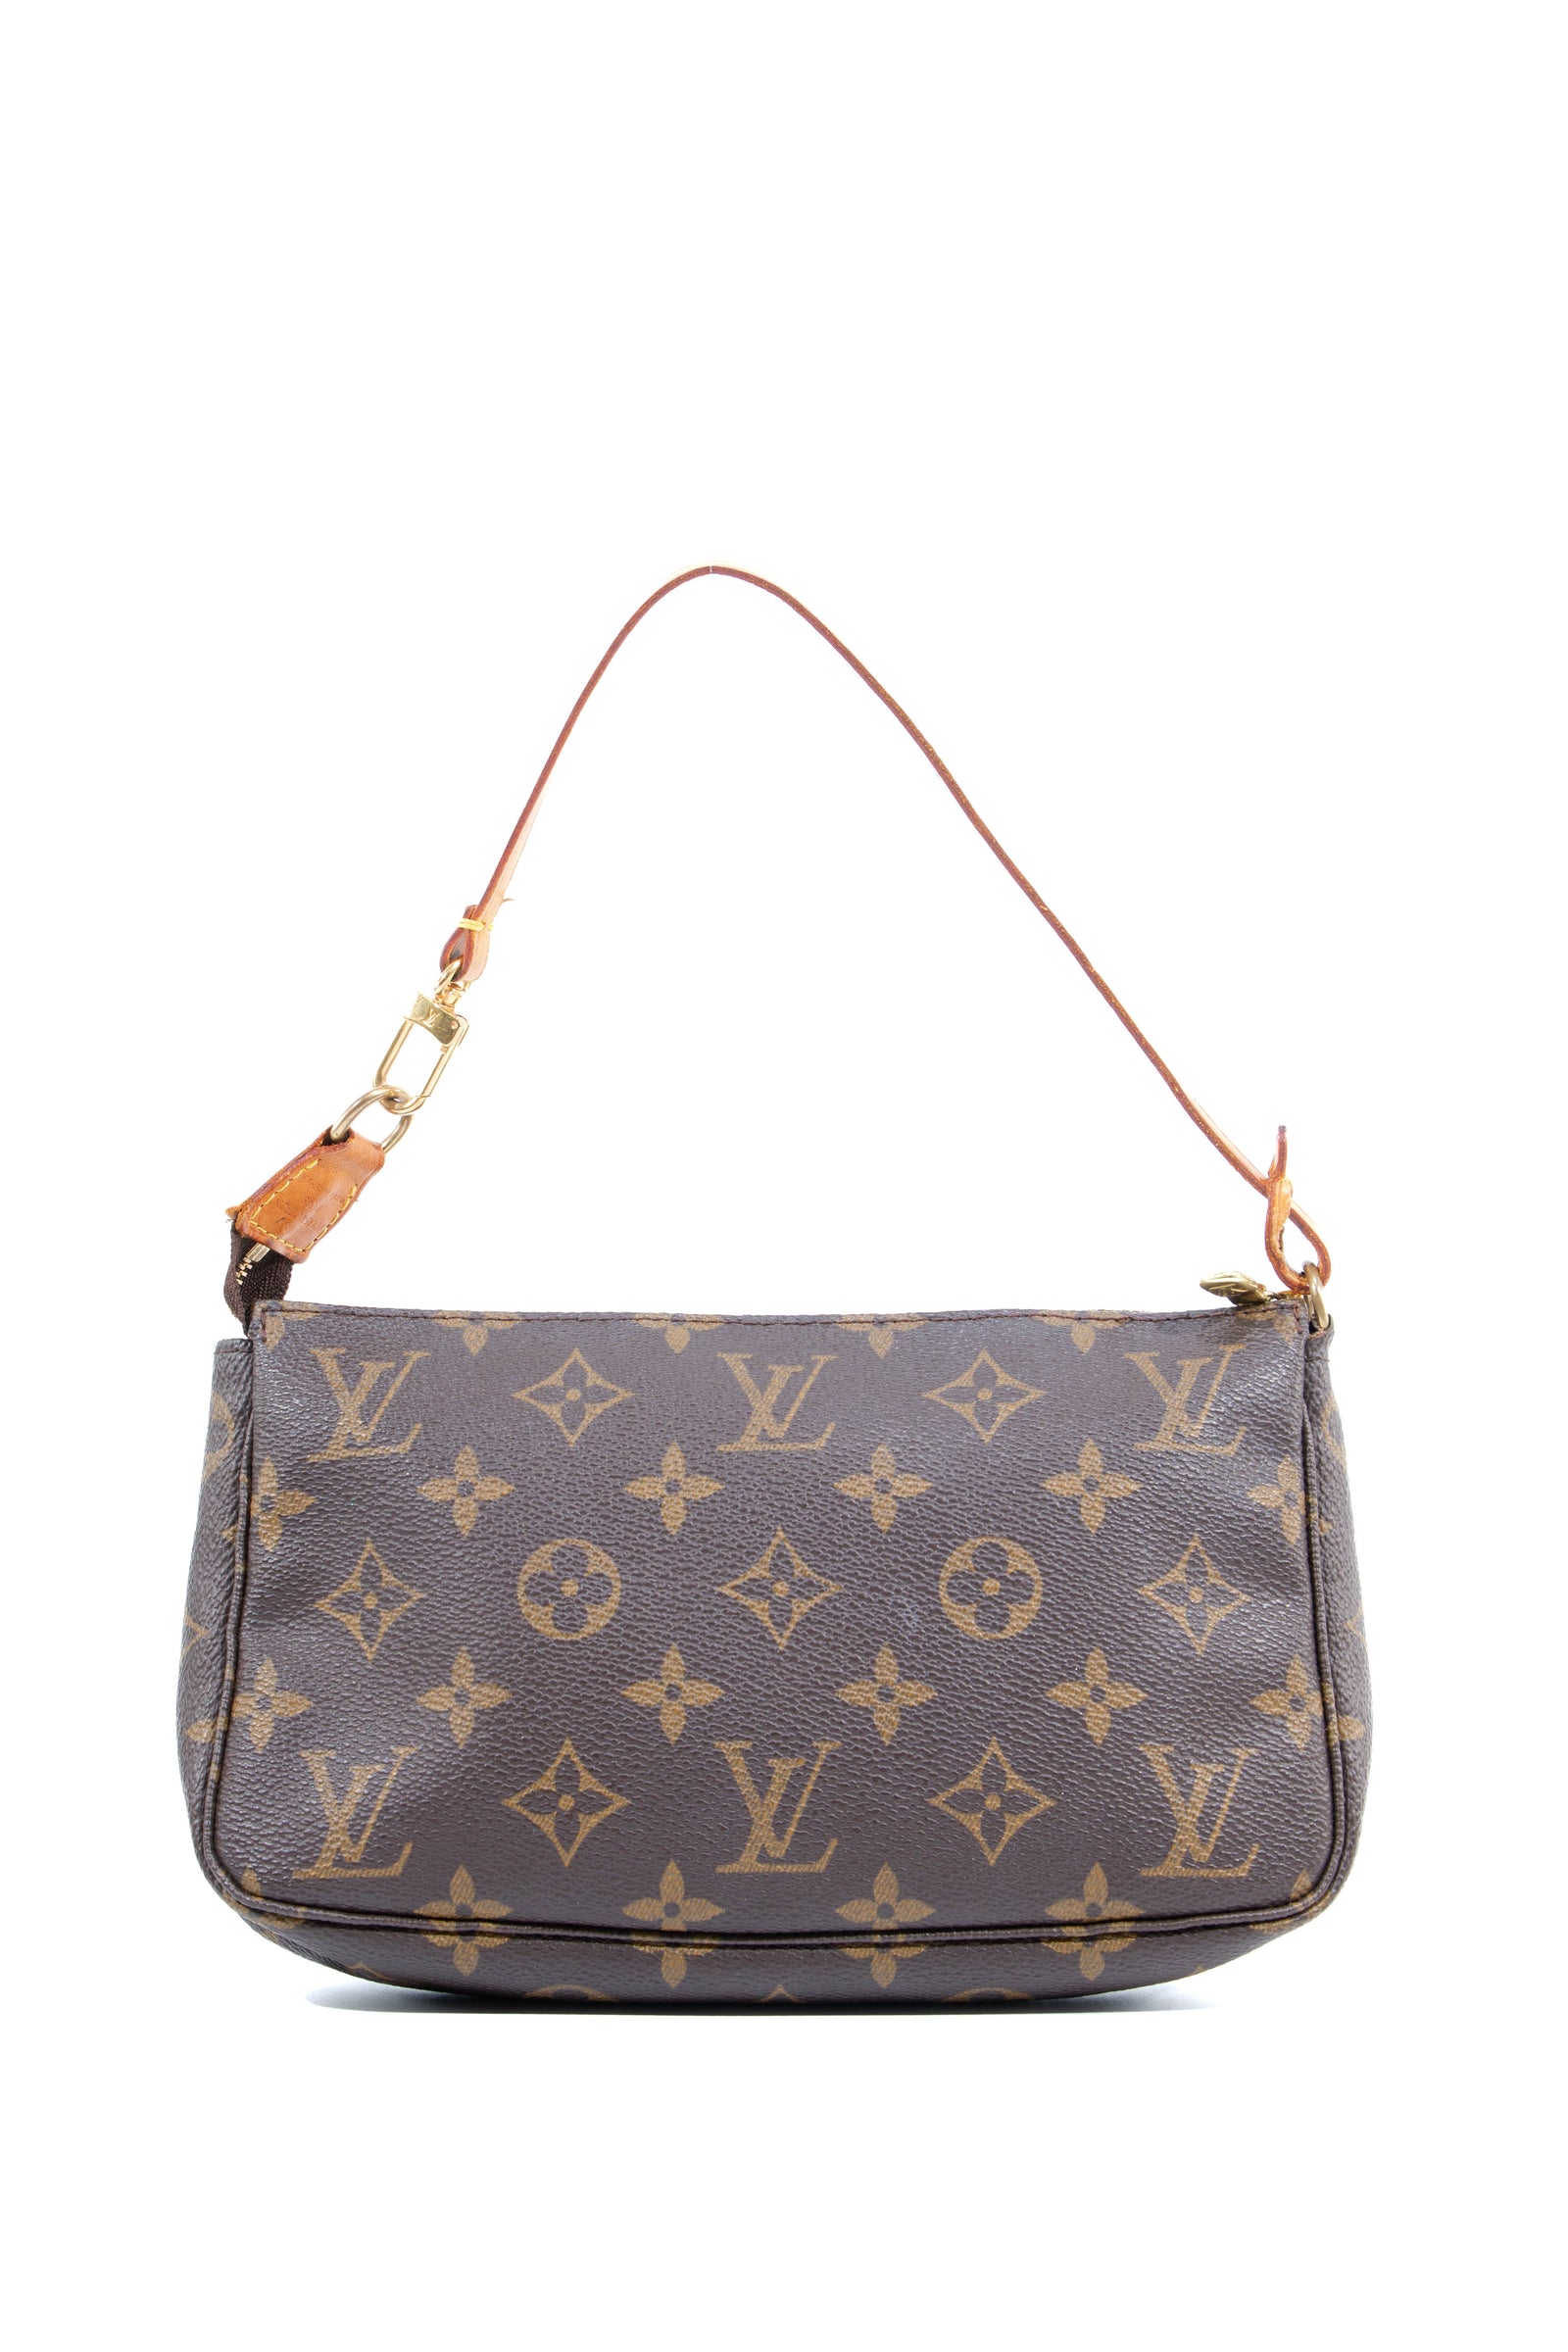 Louis Vuitton's Monogram V as a symbol of French chic and impeccable  craftsmanship